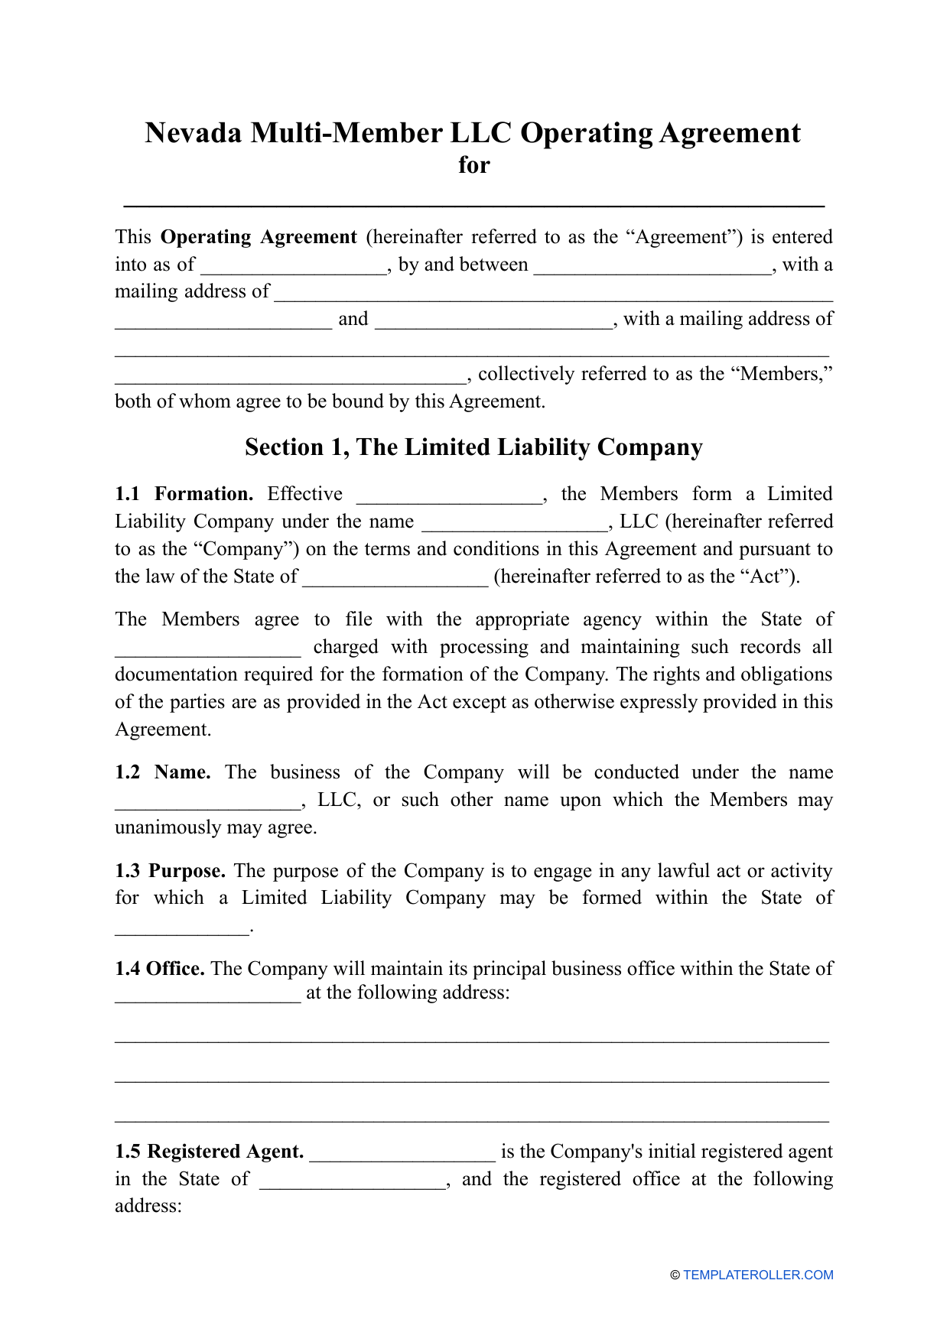 Multi-Member LLC Operating Agreement Template - Nevada, Page 1